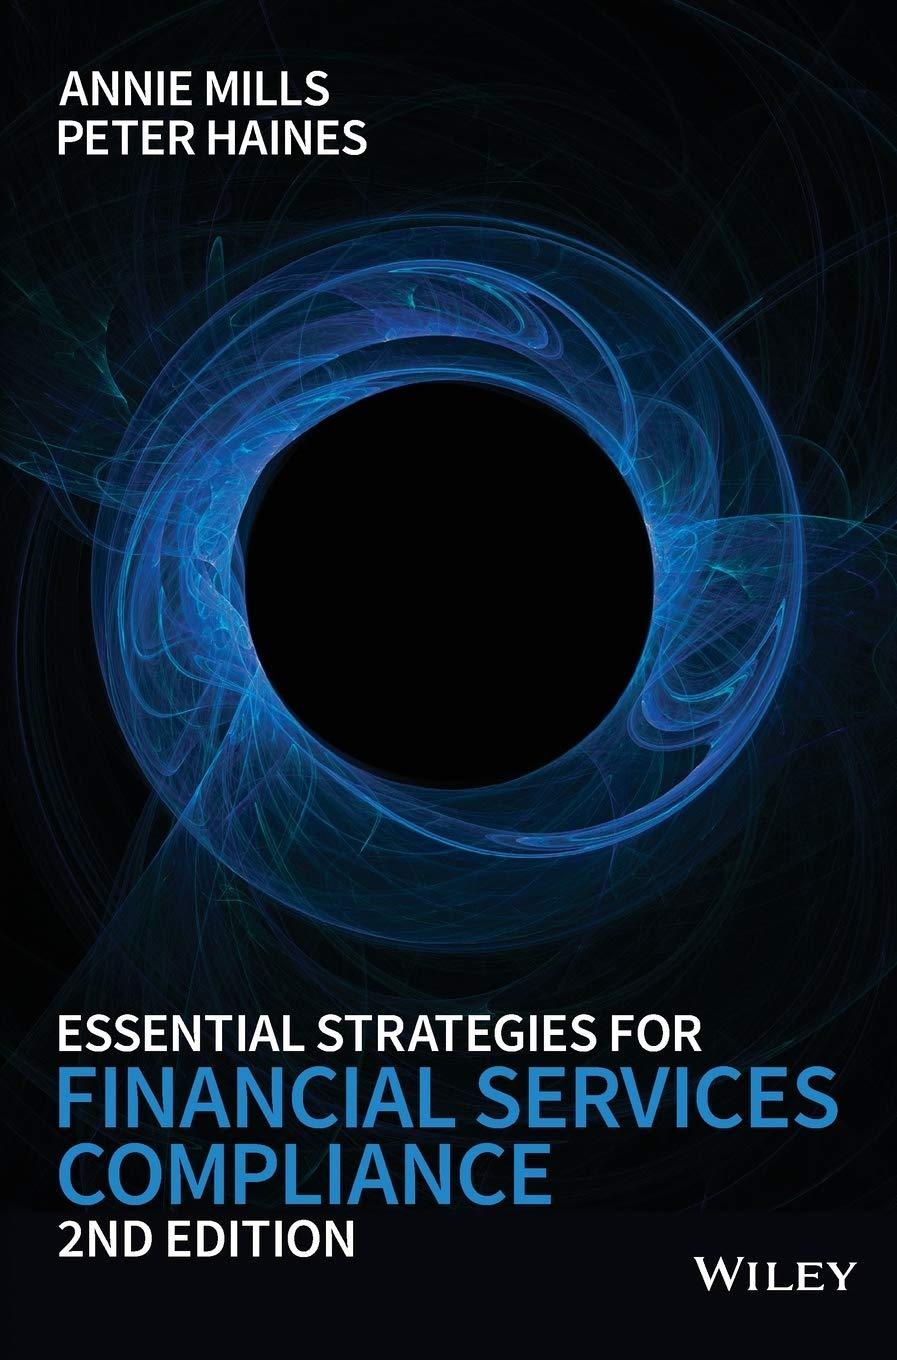 essential strategies for financial services compliance 2nd edition annie mills, peter haines 1118906136,